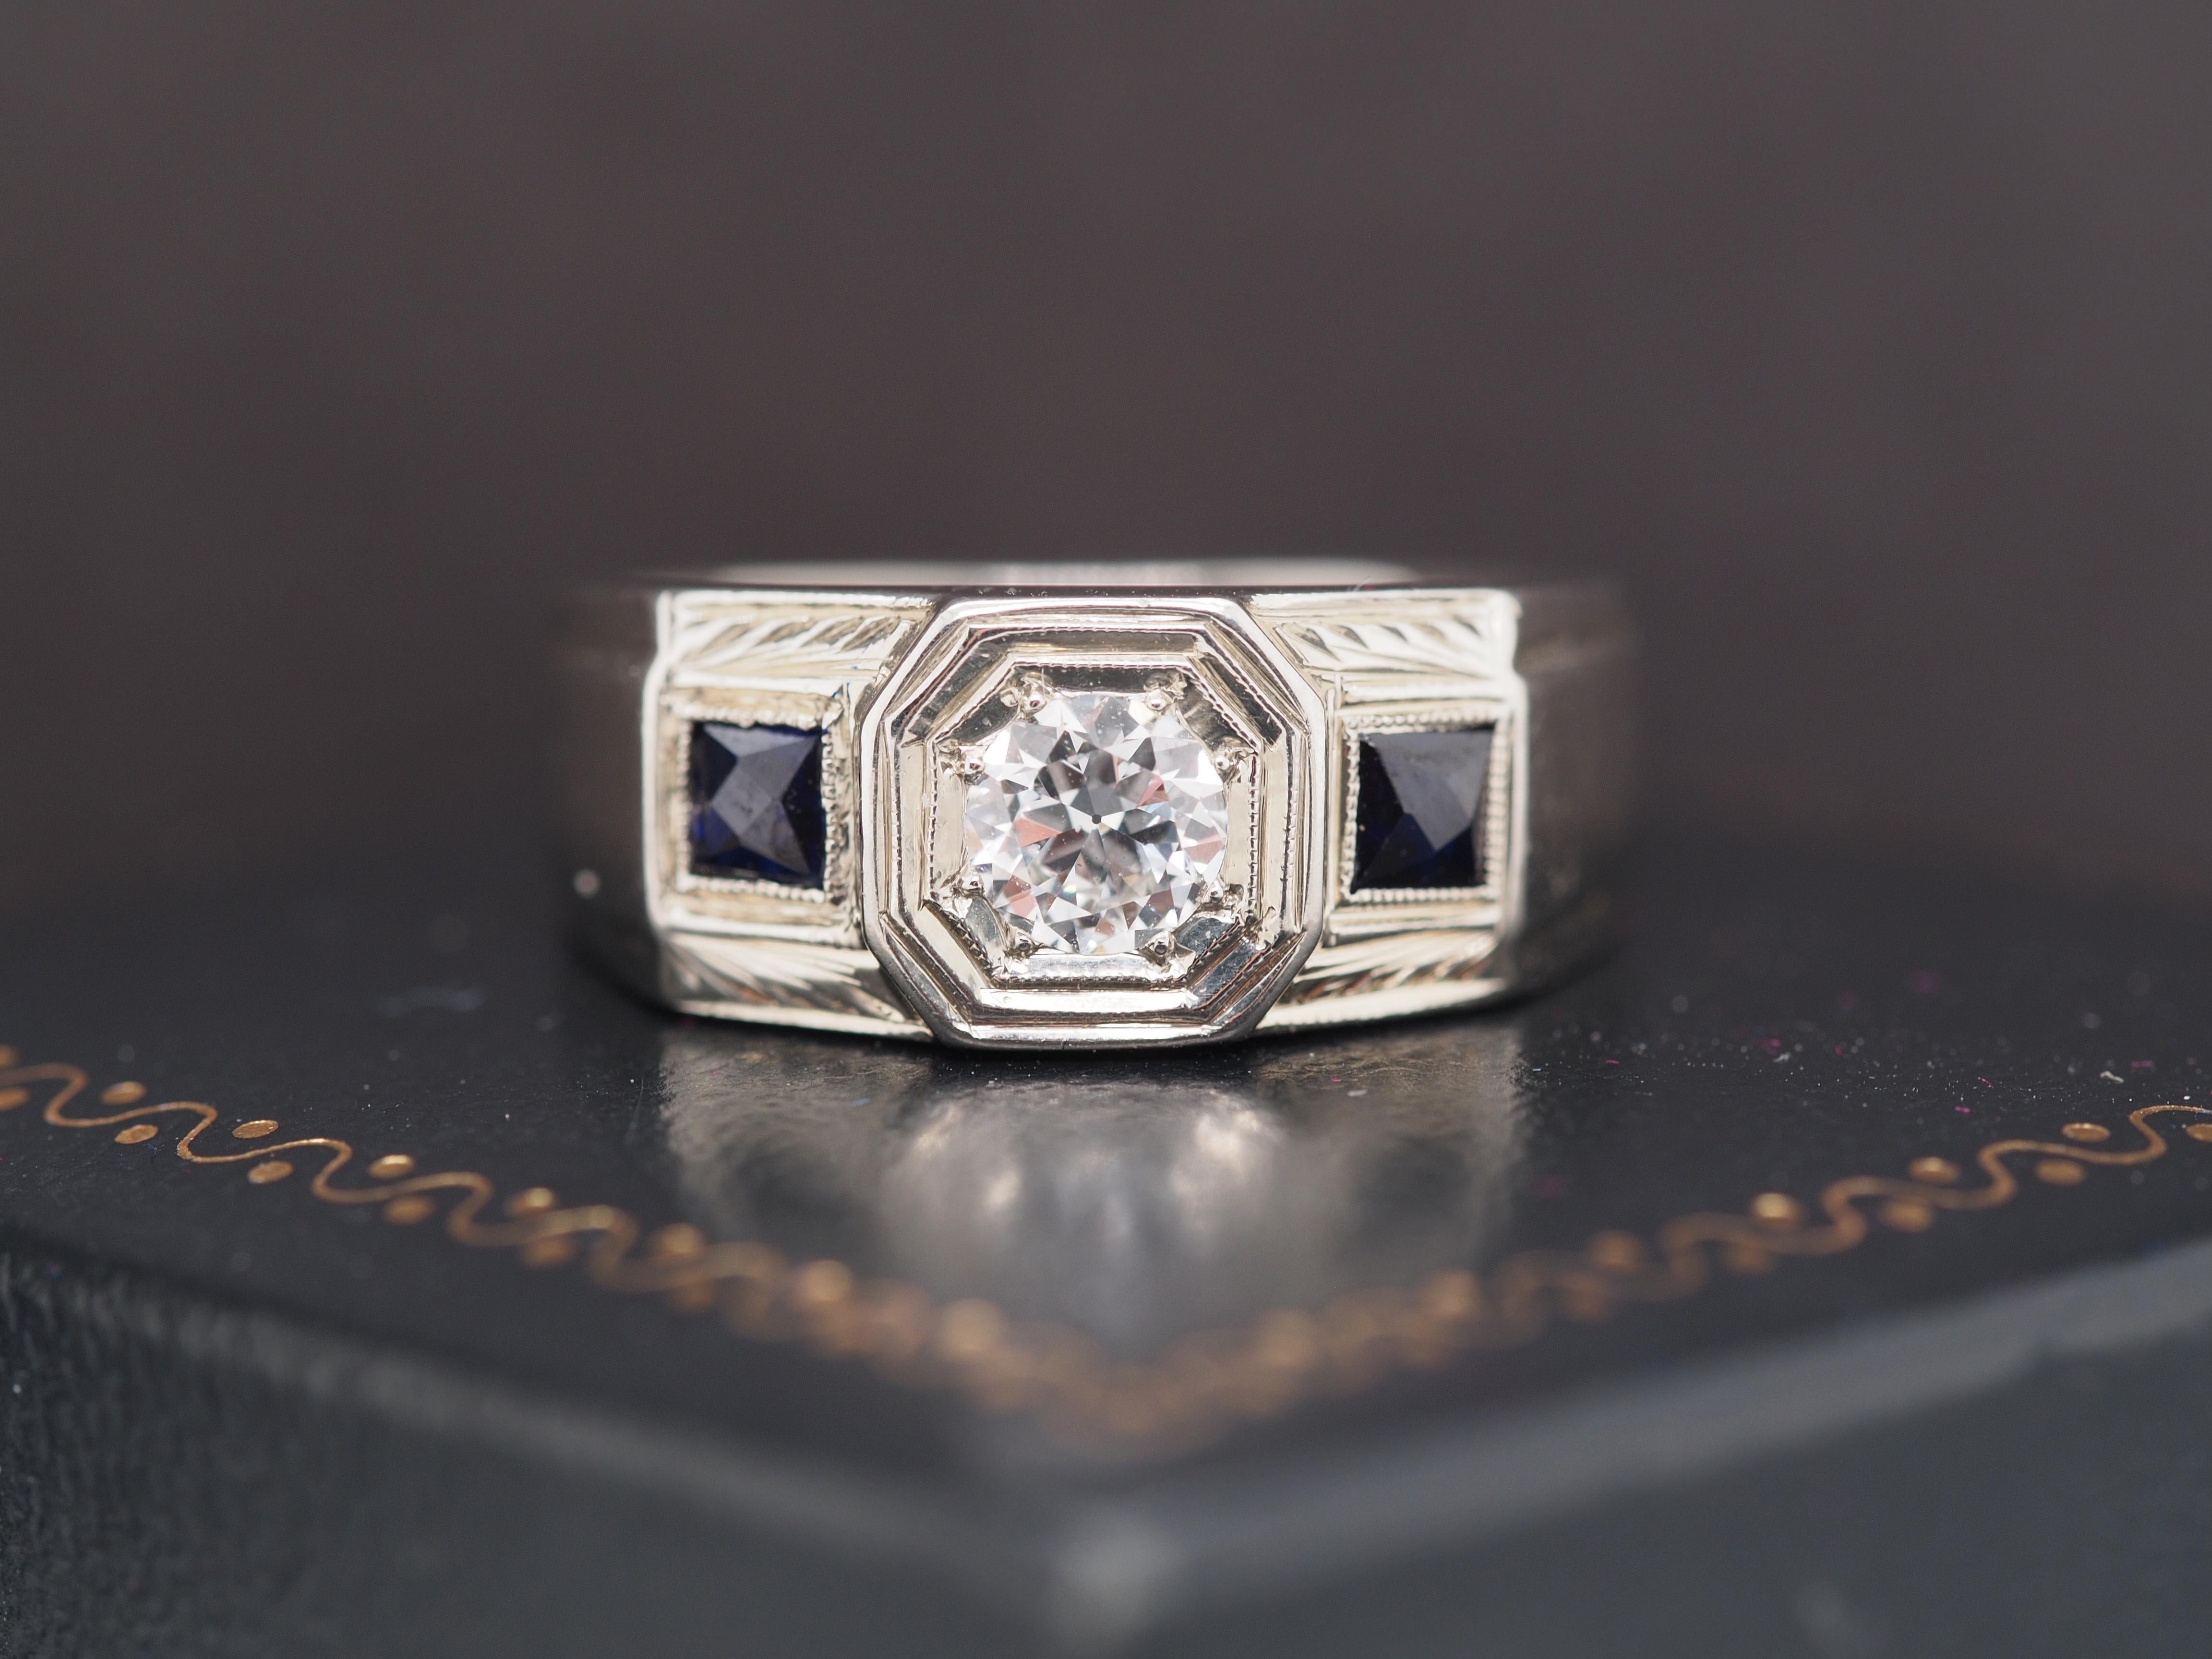 Year: 1940s
Item Details:
Ring Size: 7
Metal Type: 18K White Gold [Hallmarked, and Tested]
Weight: 7.8 grams
Diamond Details
Center Diamond: .38ct, Old European Brilliant, F Color, VS Clarity, Natural Diamond
Side Sapphires: French Cut, Natural,